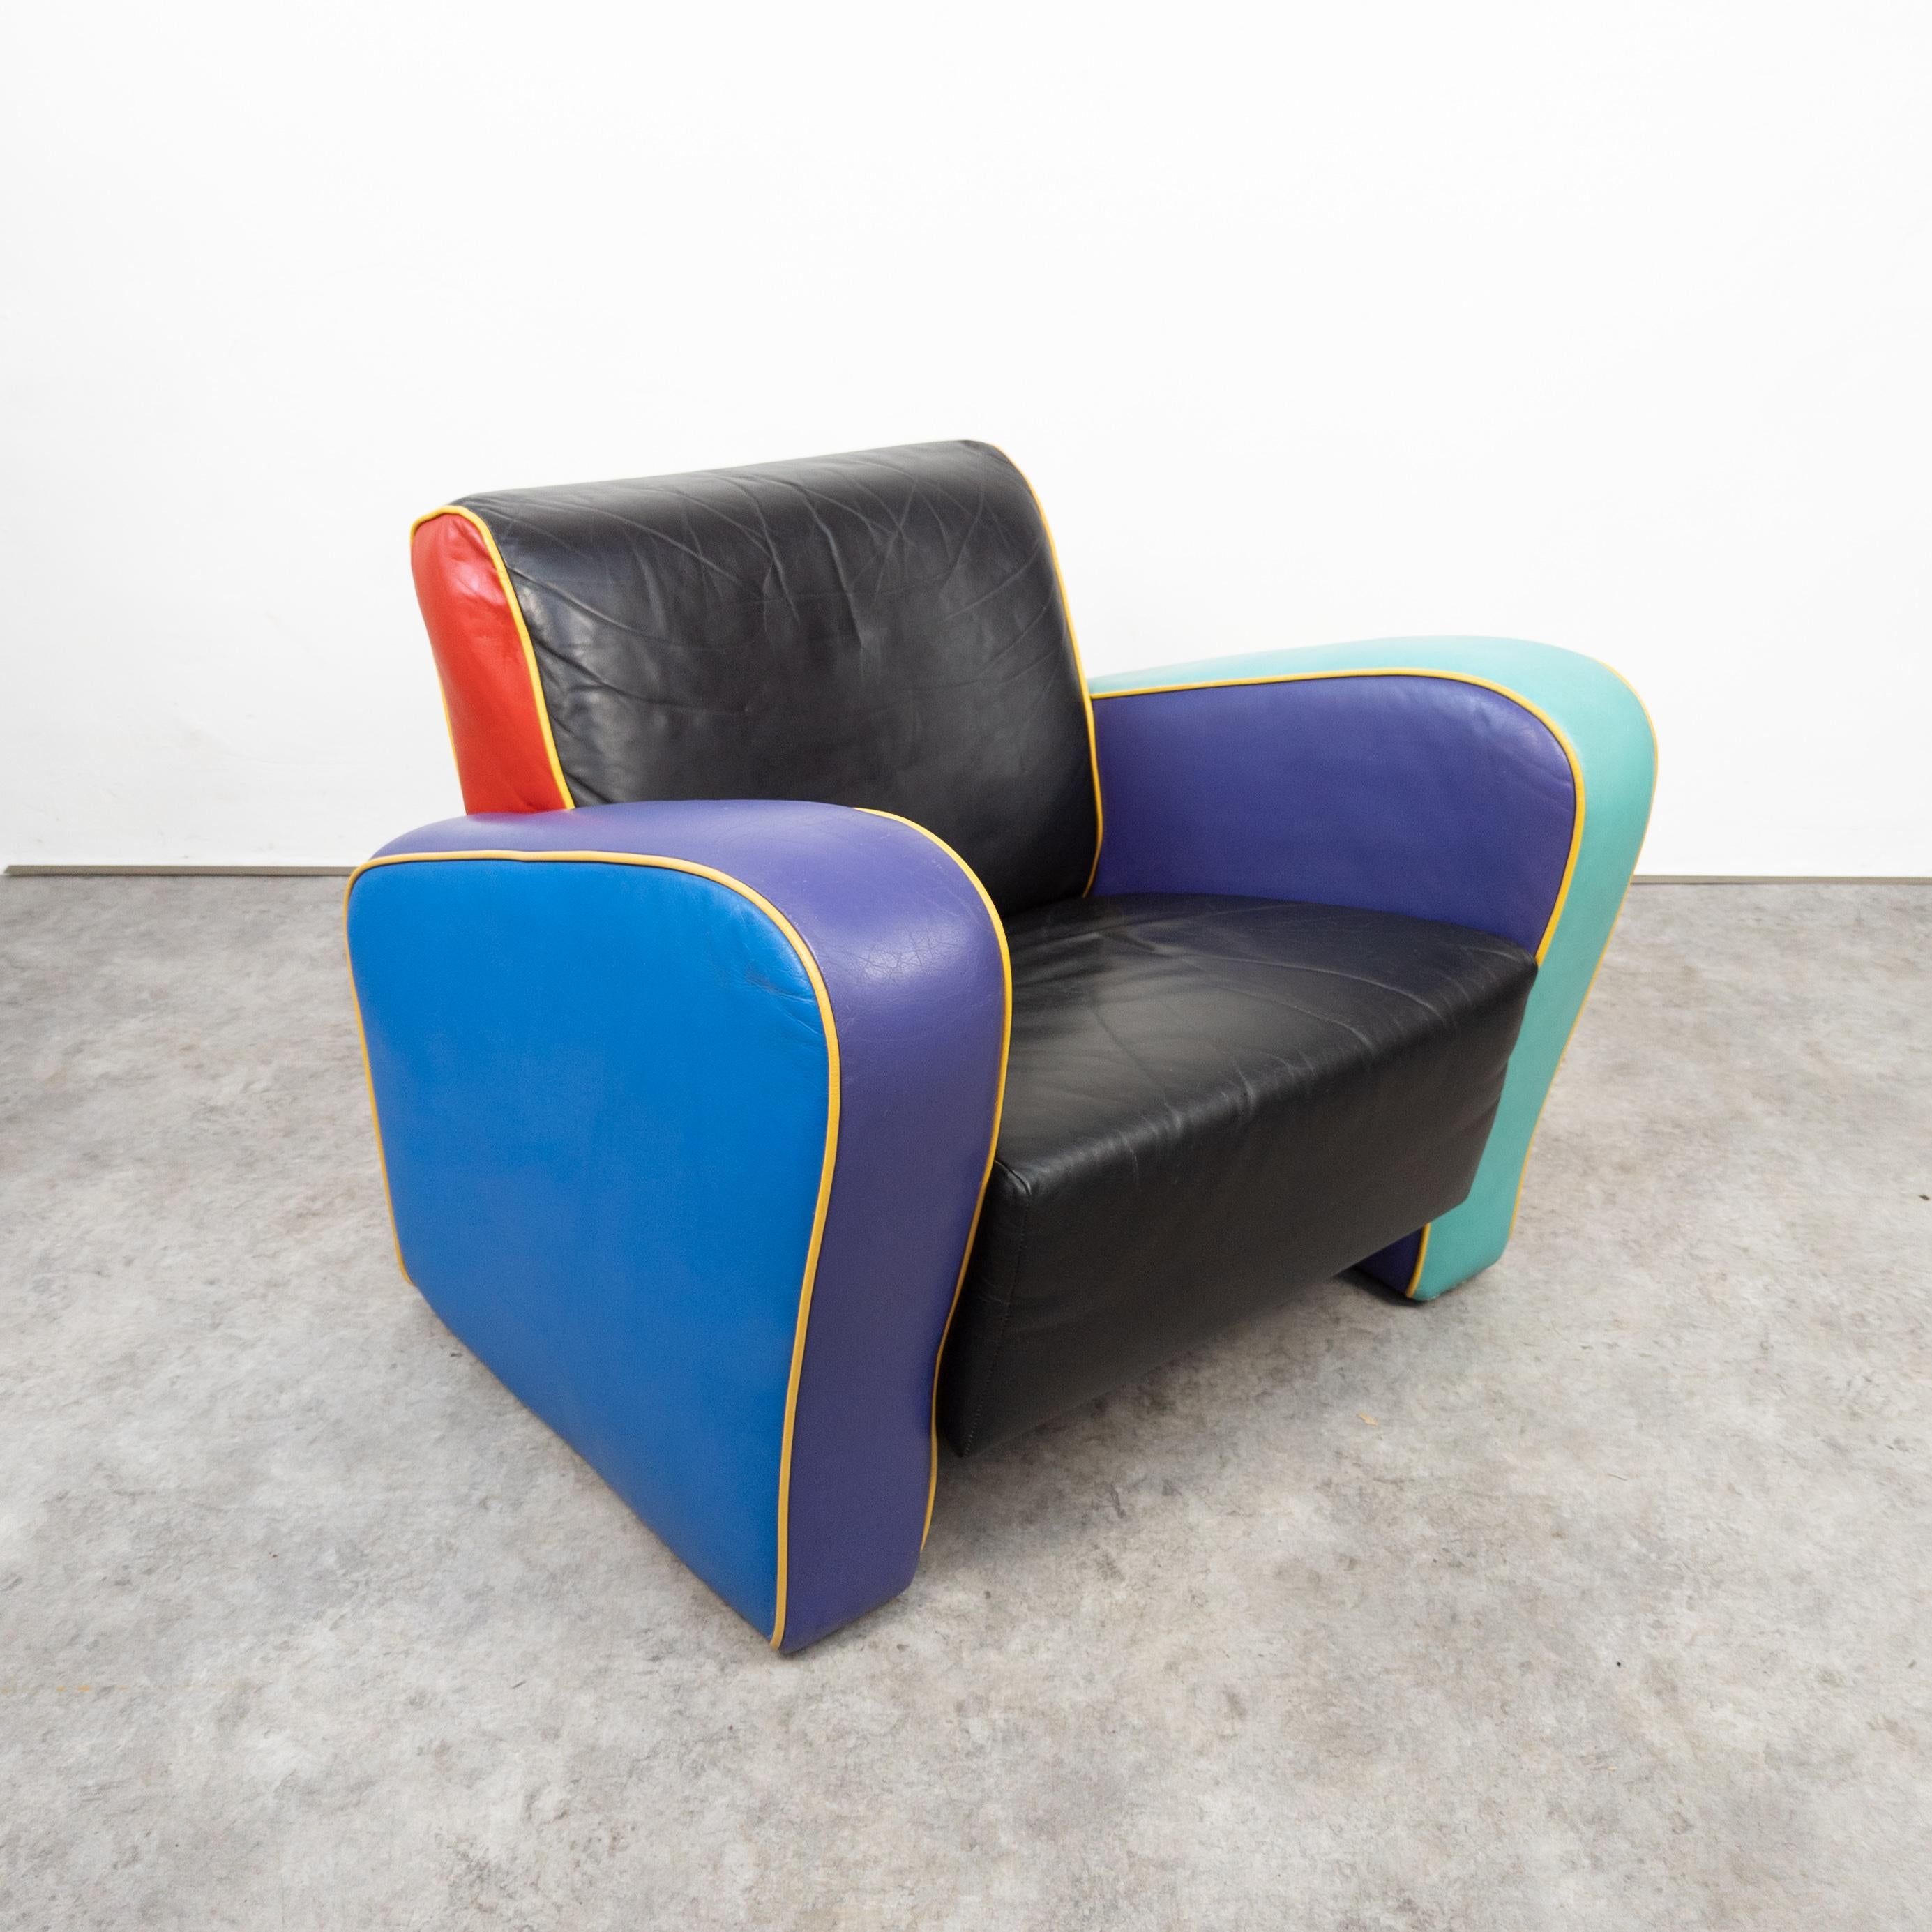 1980s armchair inspired by Harry Siegel. Upholstered in multiple colors vinyl. In good vintage condition with some traces of wear and age, few scratches on the vinyl. Structurally sound. Dimensions: height 70 cm, width 85 cm, depth 80 cm, seat